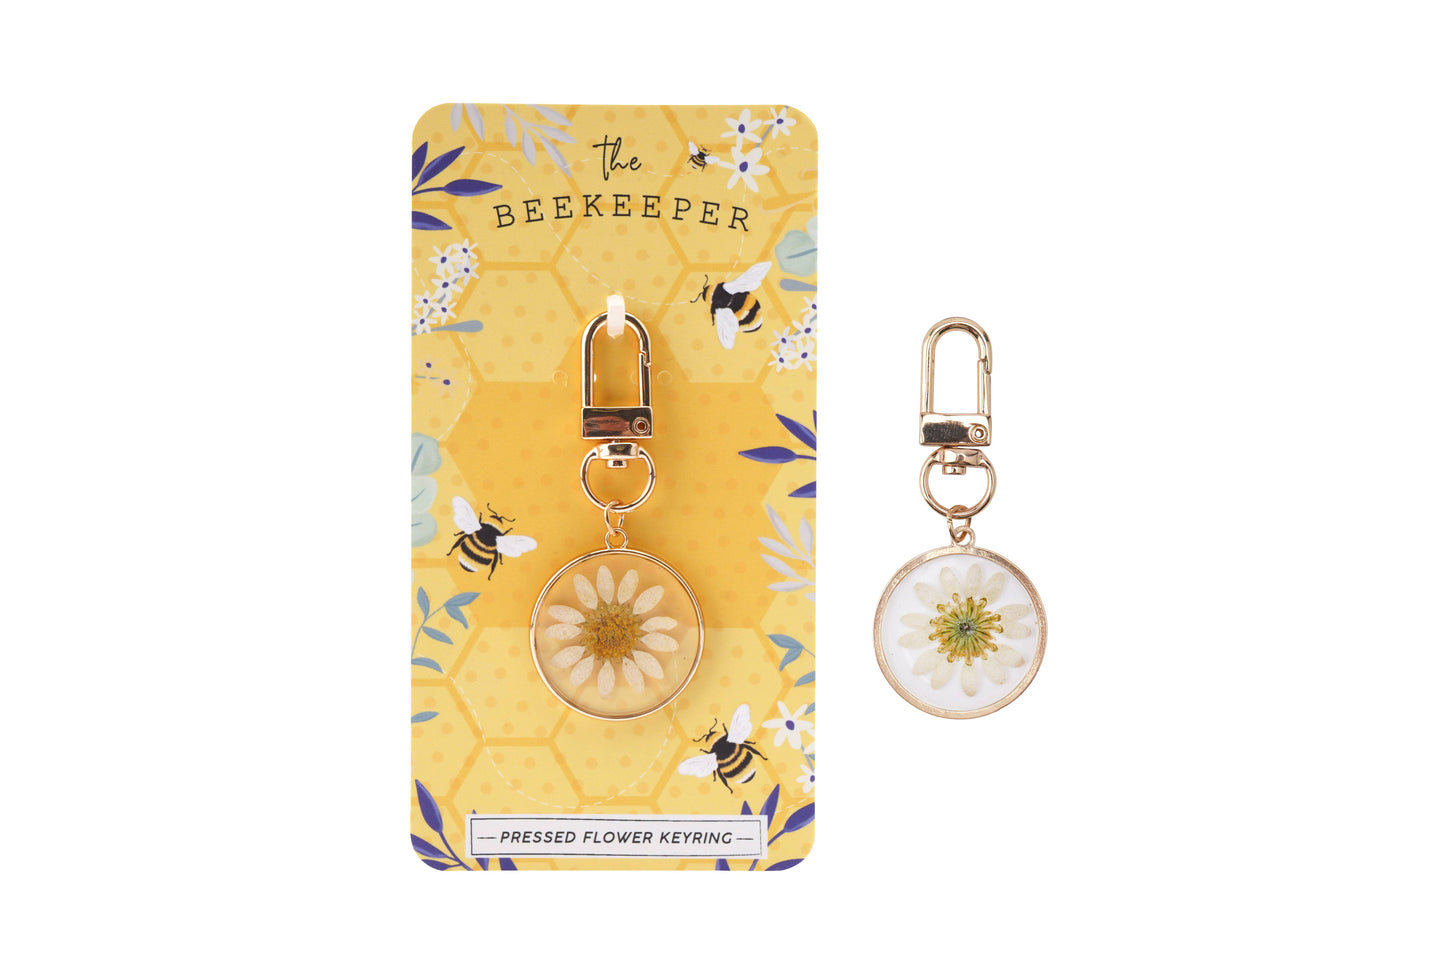 CGB Giftware - The Beekeeper White Pressed Daisy Flower Resin Keyring